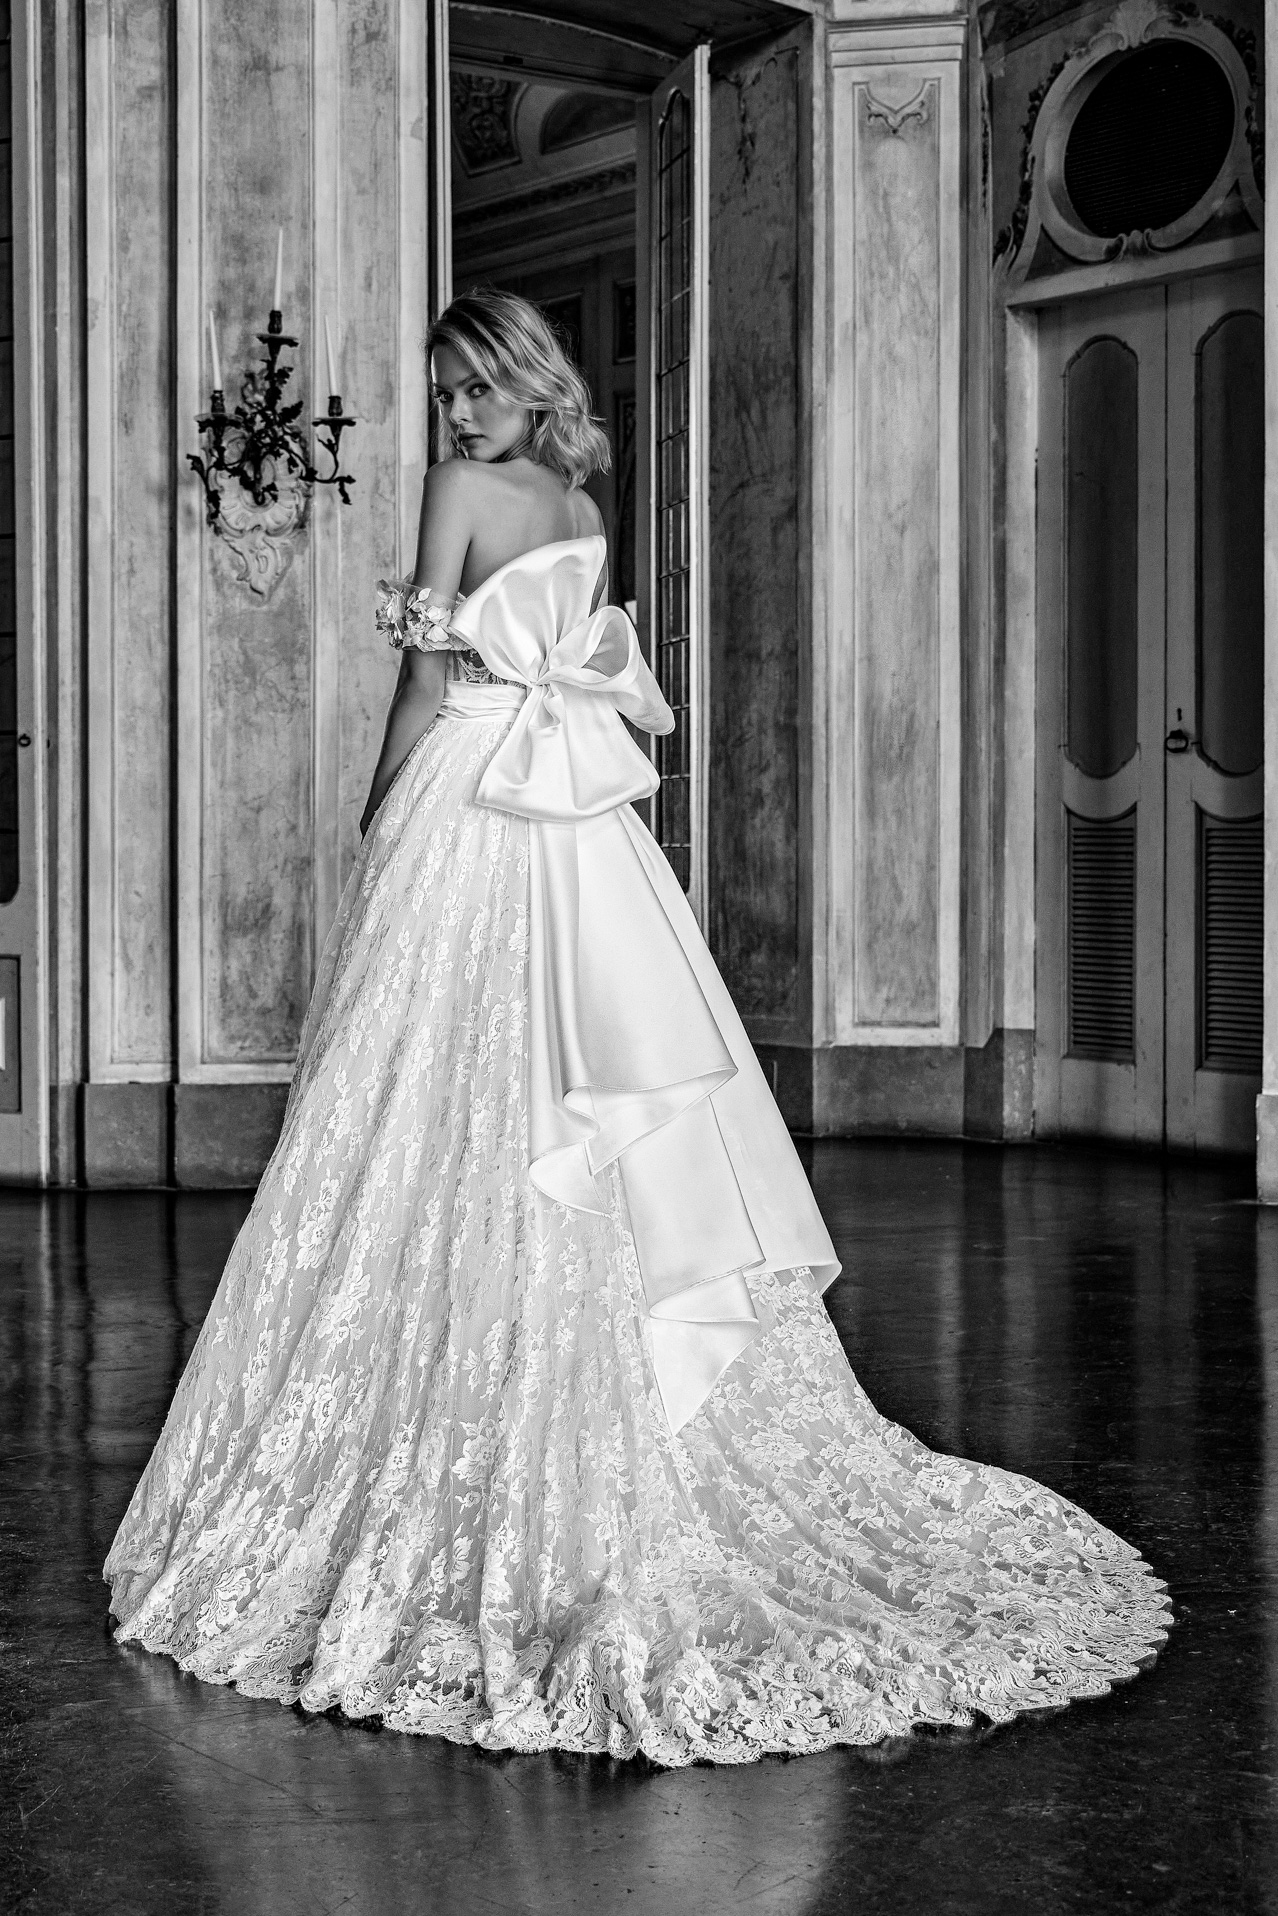 Wedding Dress Trends 2025: Let's Take a Look - Experience The Thrill of Being a Bride Beauty Icon Between Art and Fashion - Vogue Style 100% Made in Italy for a Fairytale Wedding 